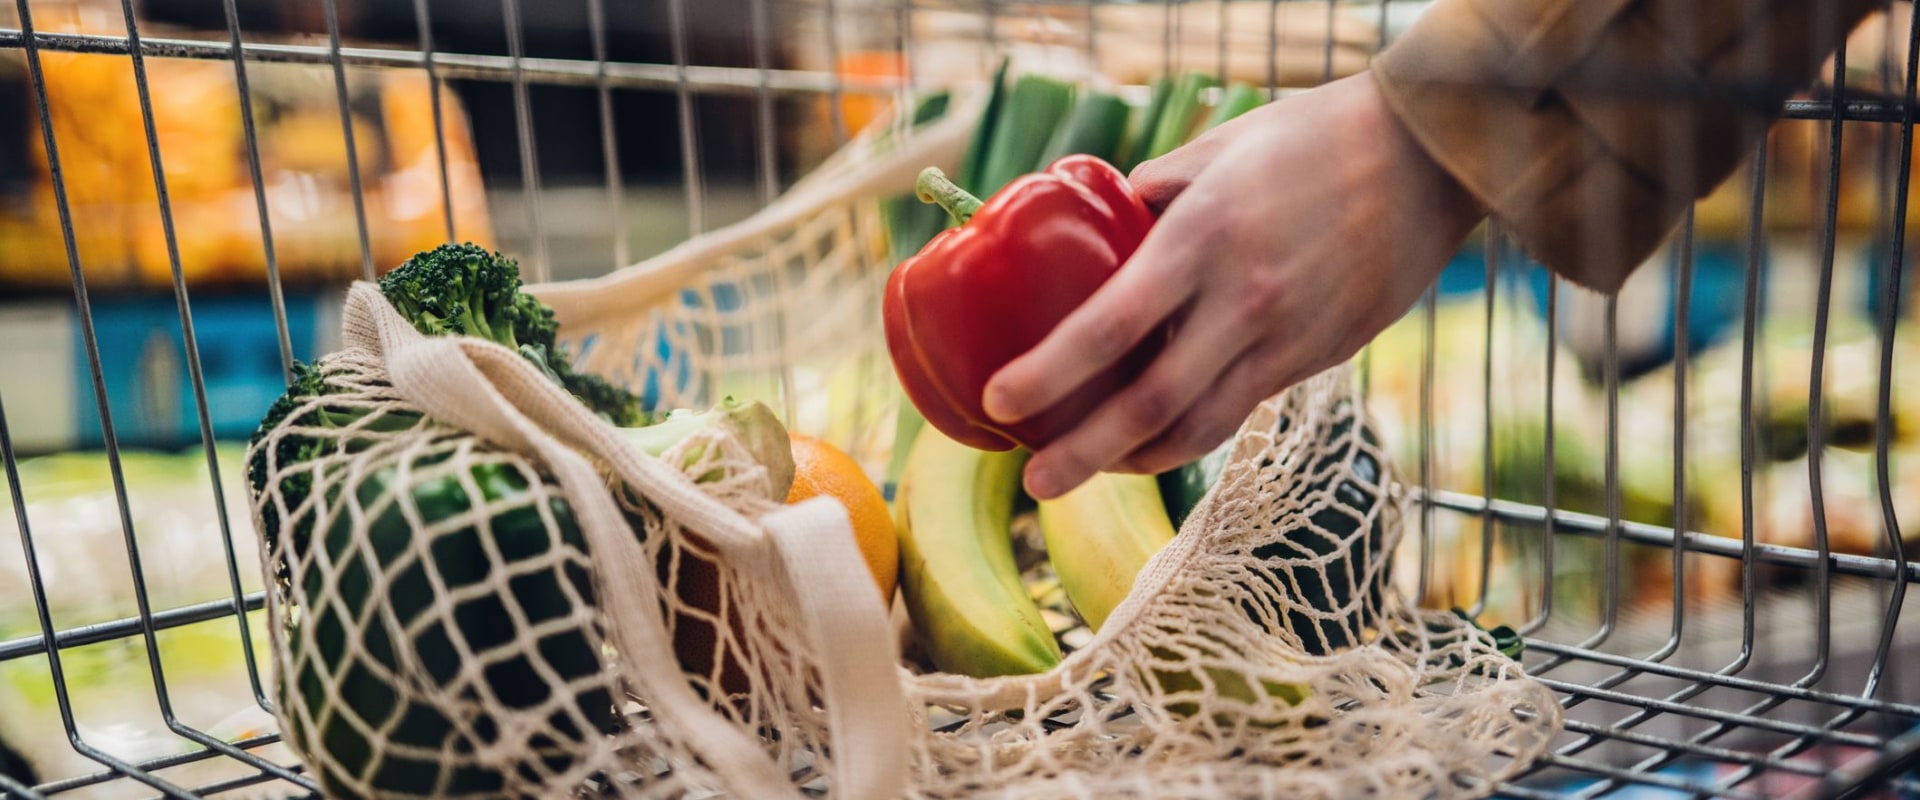 Grocery Shopping Tips for Healthy Eating